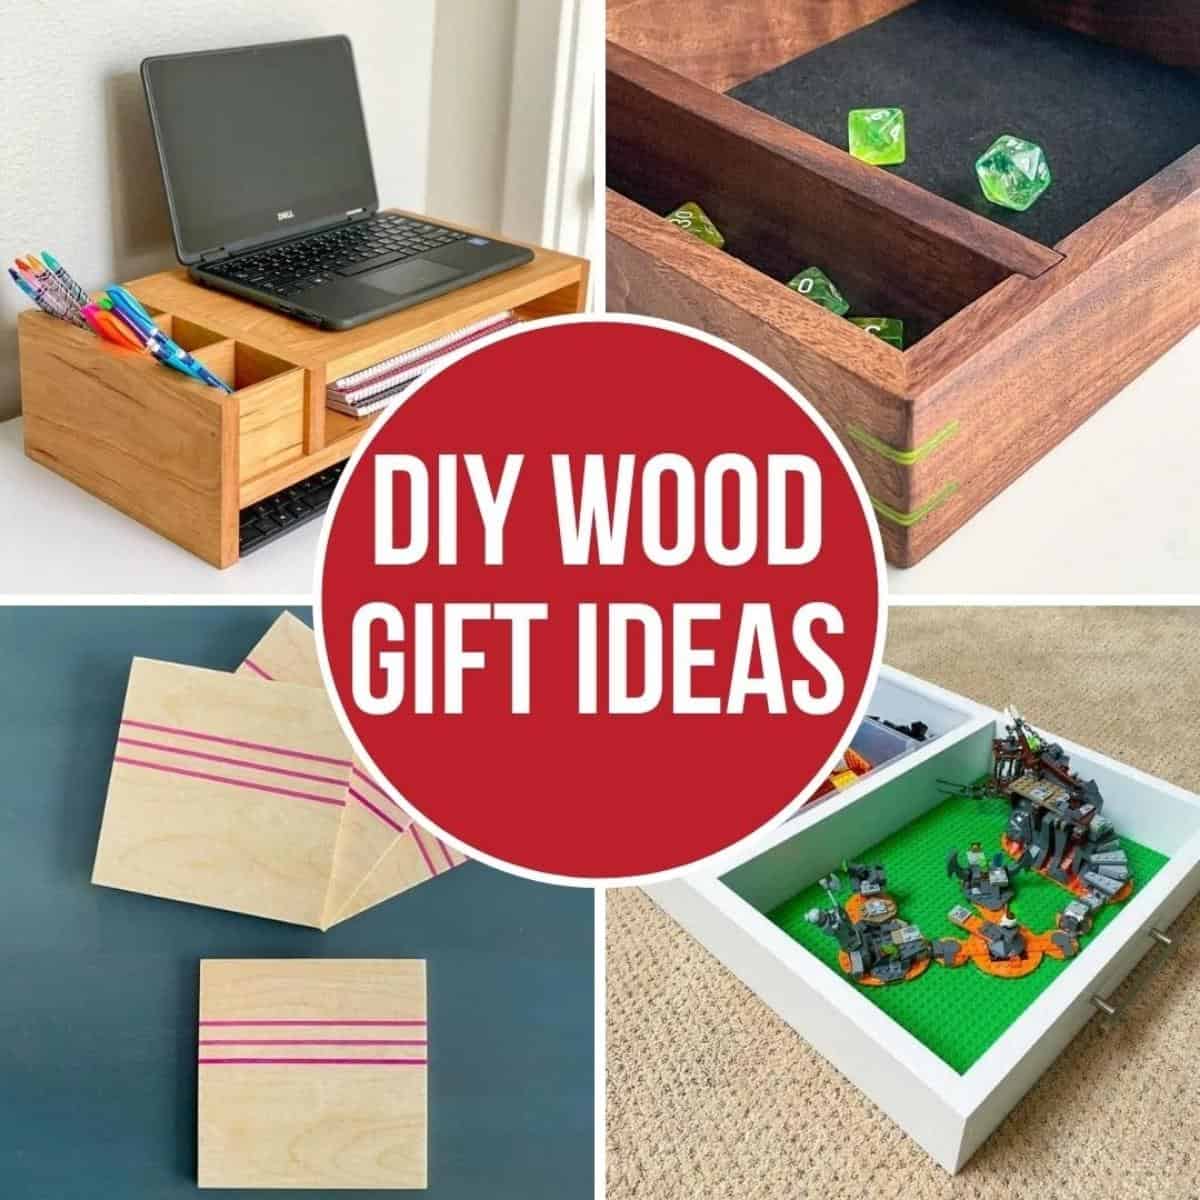 6 Simple Gifts You Can Make From Wood | DIY Montreal | Wood working gifts,  Diy projects small, Simple gifts